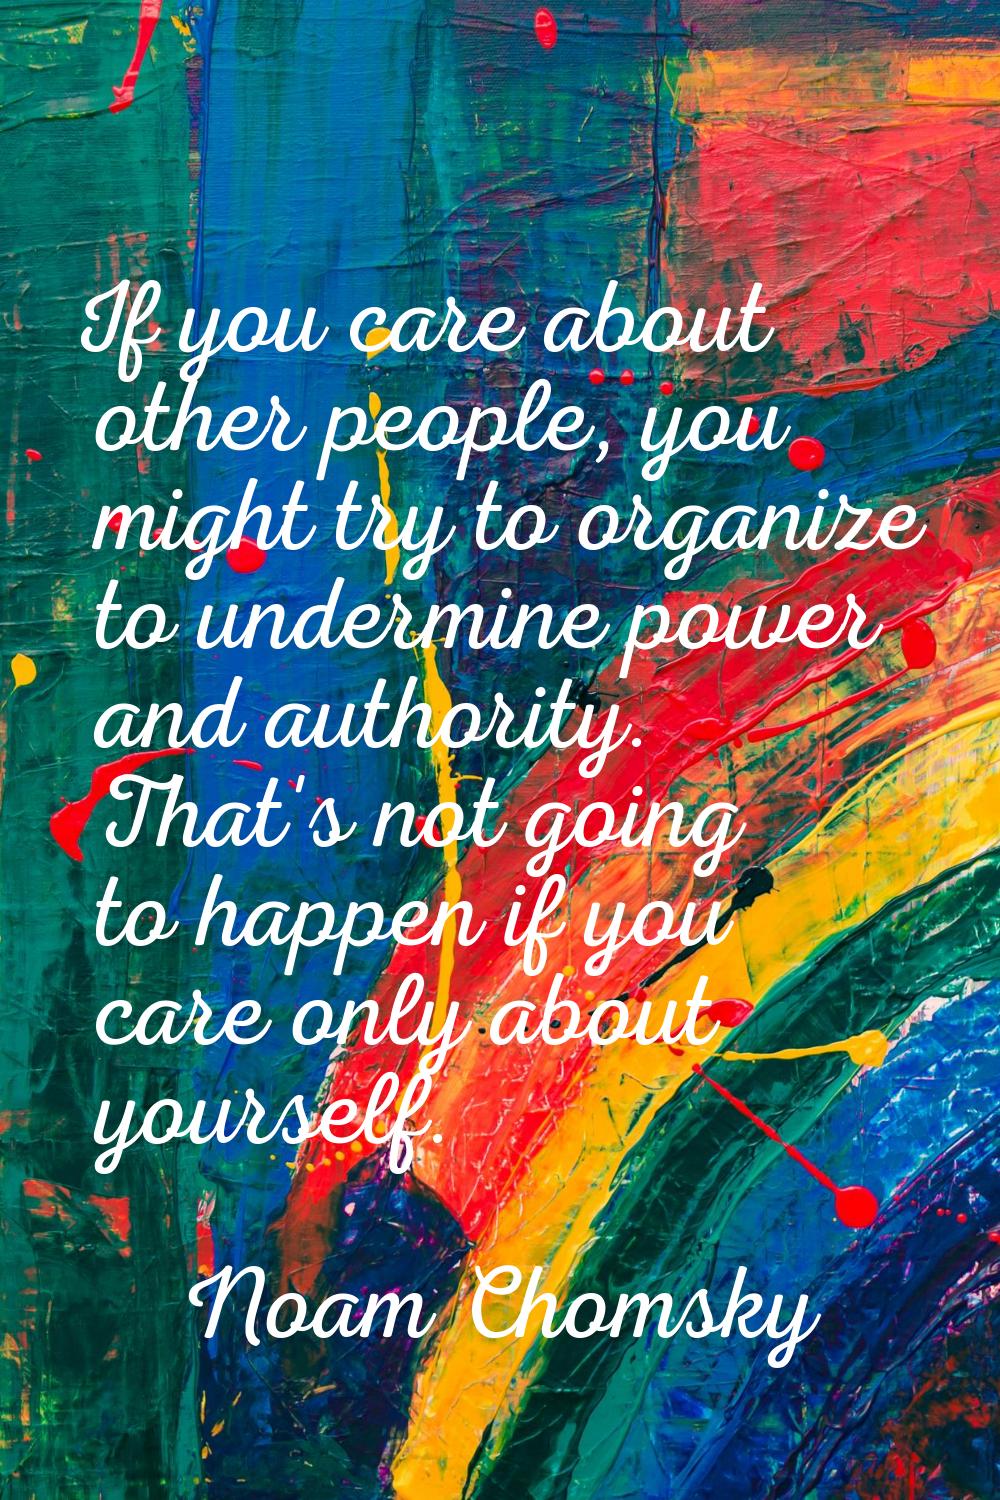 If you care about other people, you might try to organize to undermine power and authority. That's 